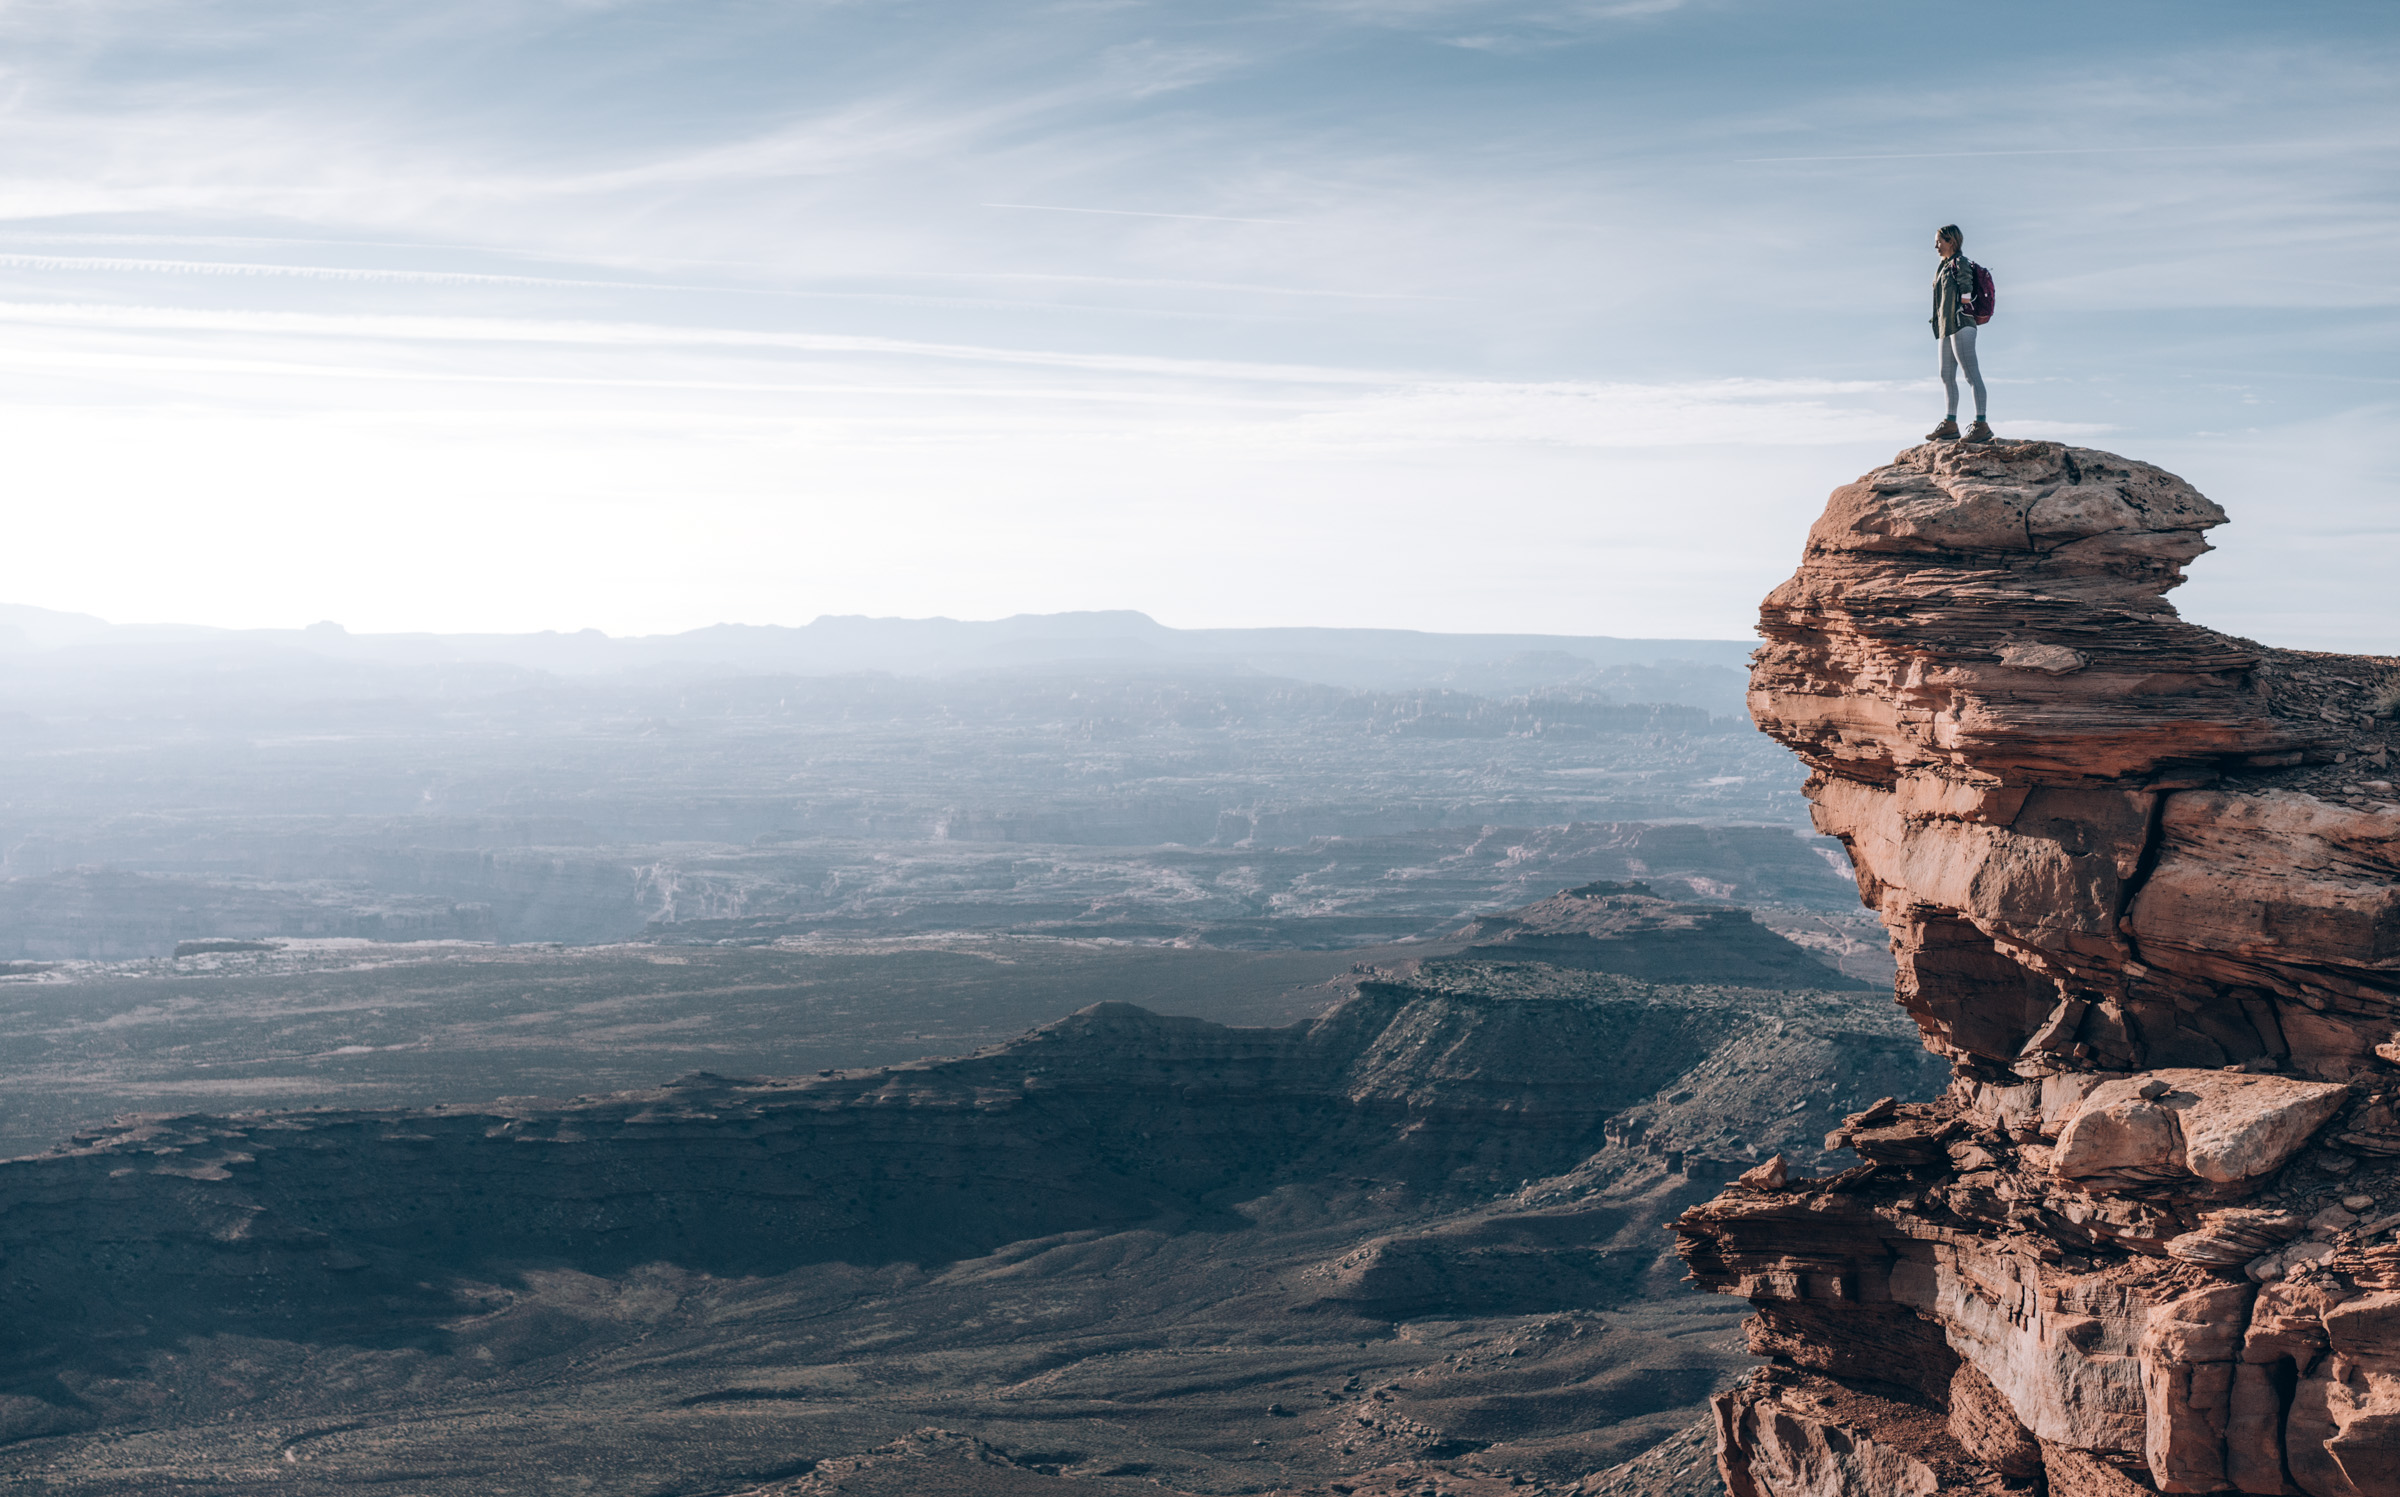 An athletic woman stands atop a very sheer dropoff at Island in the Sky, Canyonlands National Park